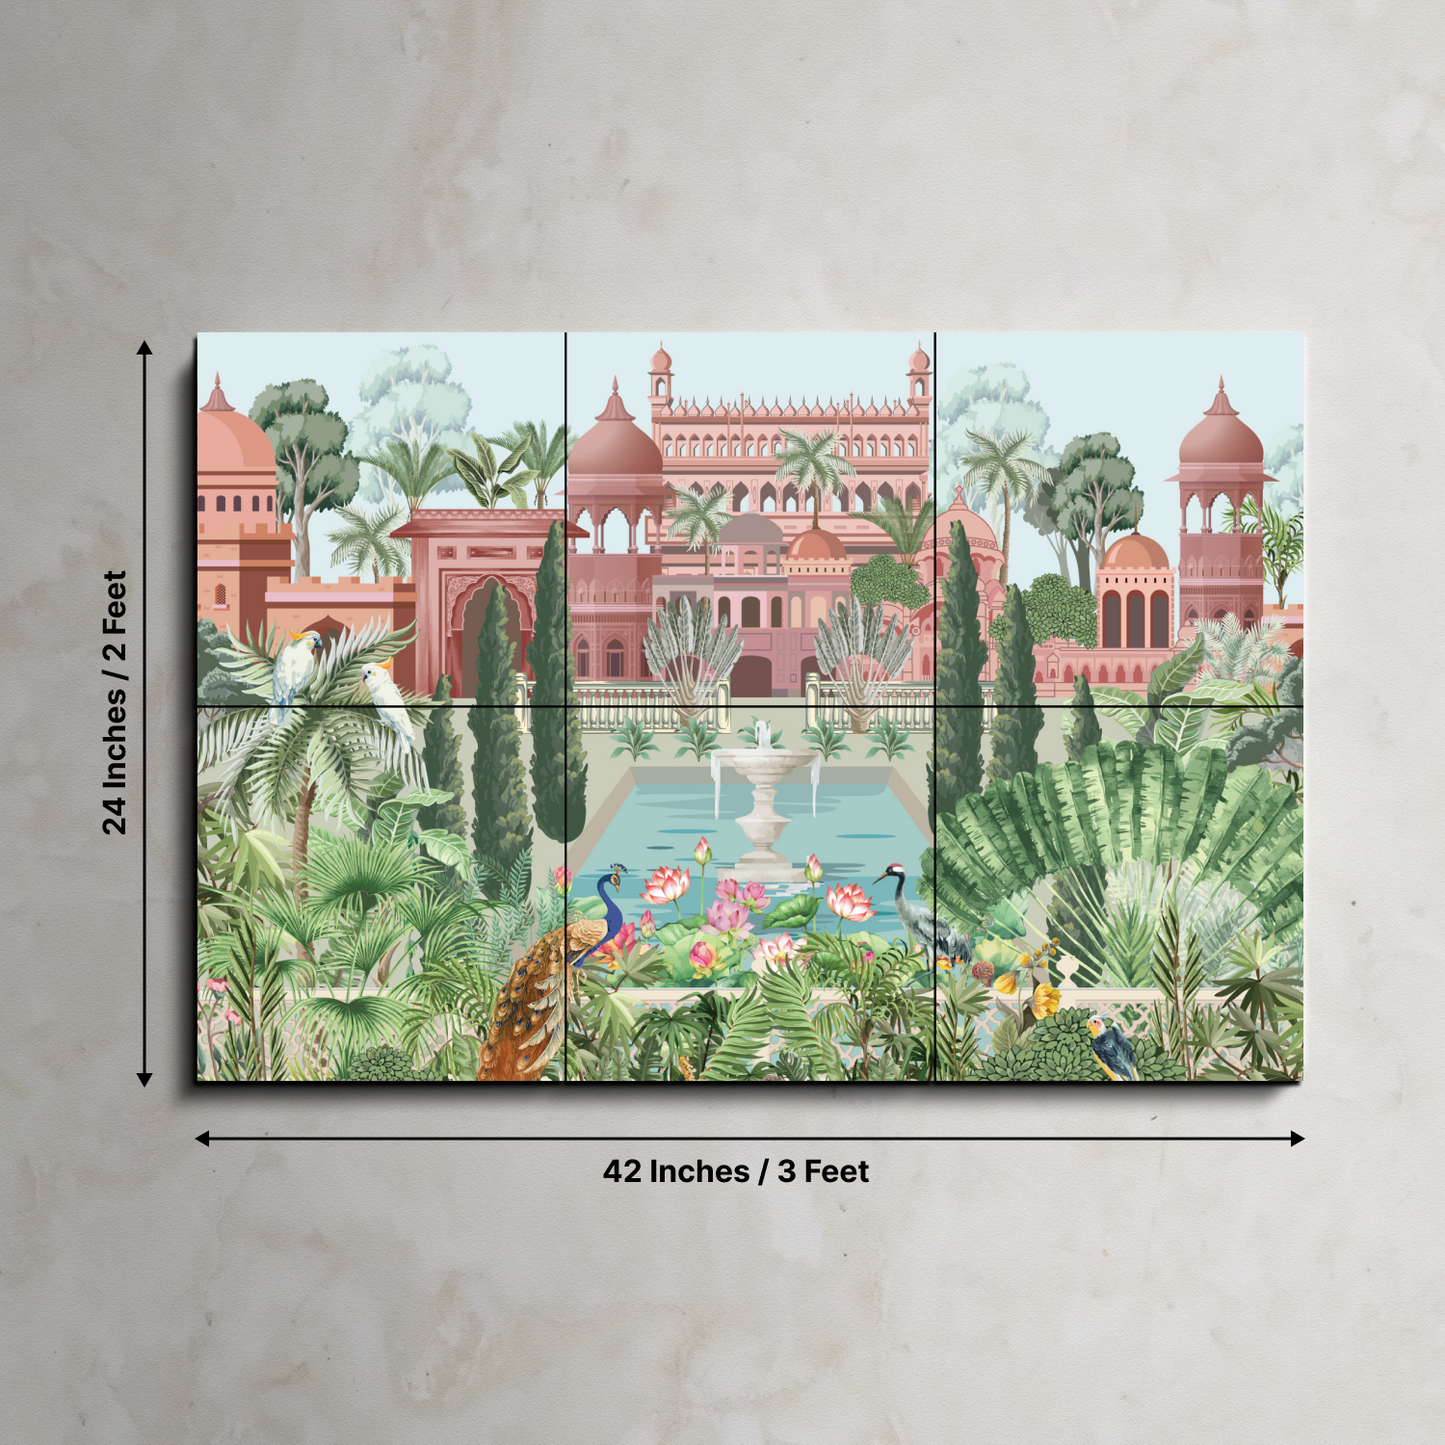 Mughal Garden and Palace Traditional Wood Print Wooden Wall Tiles Set